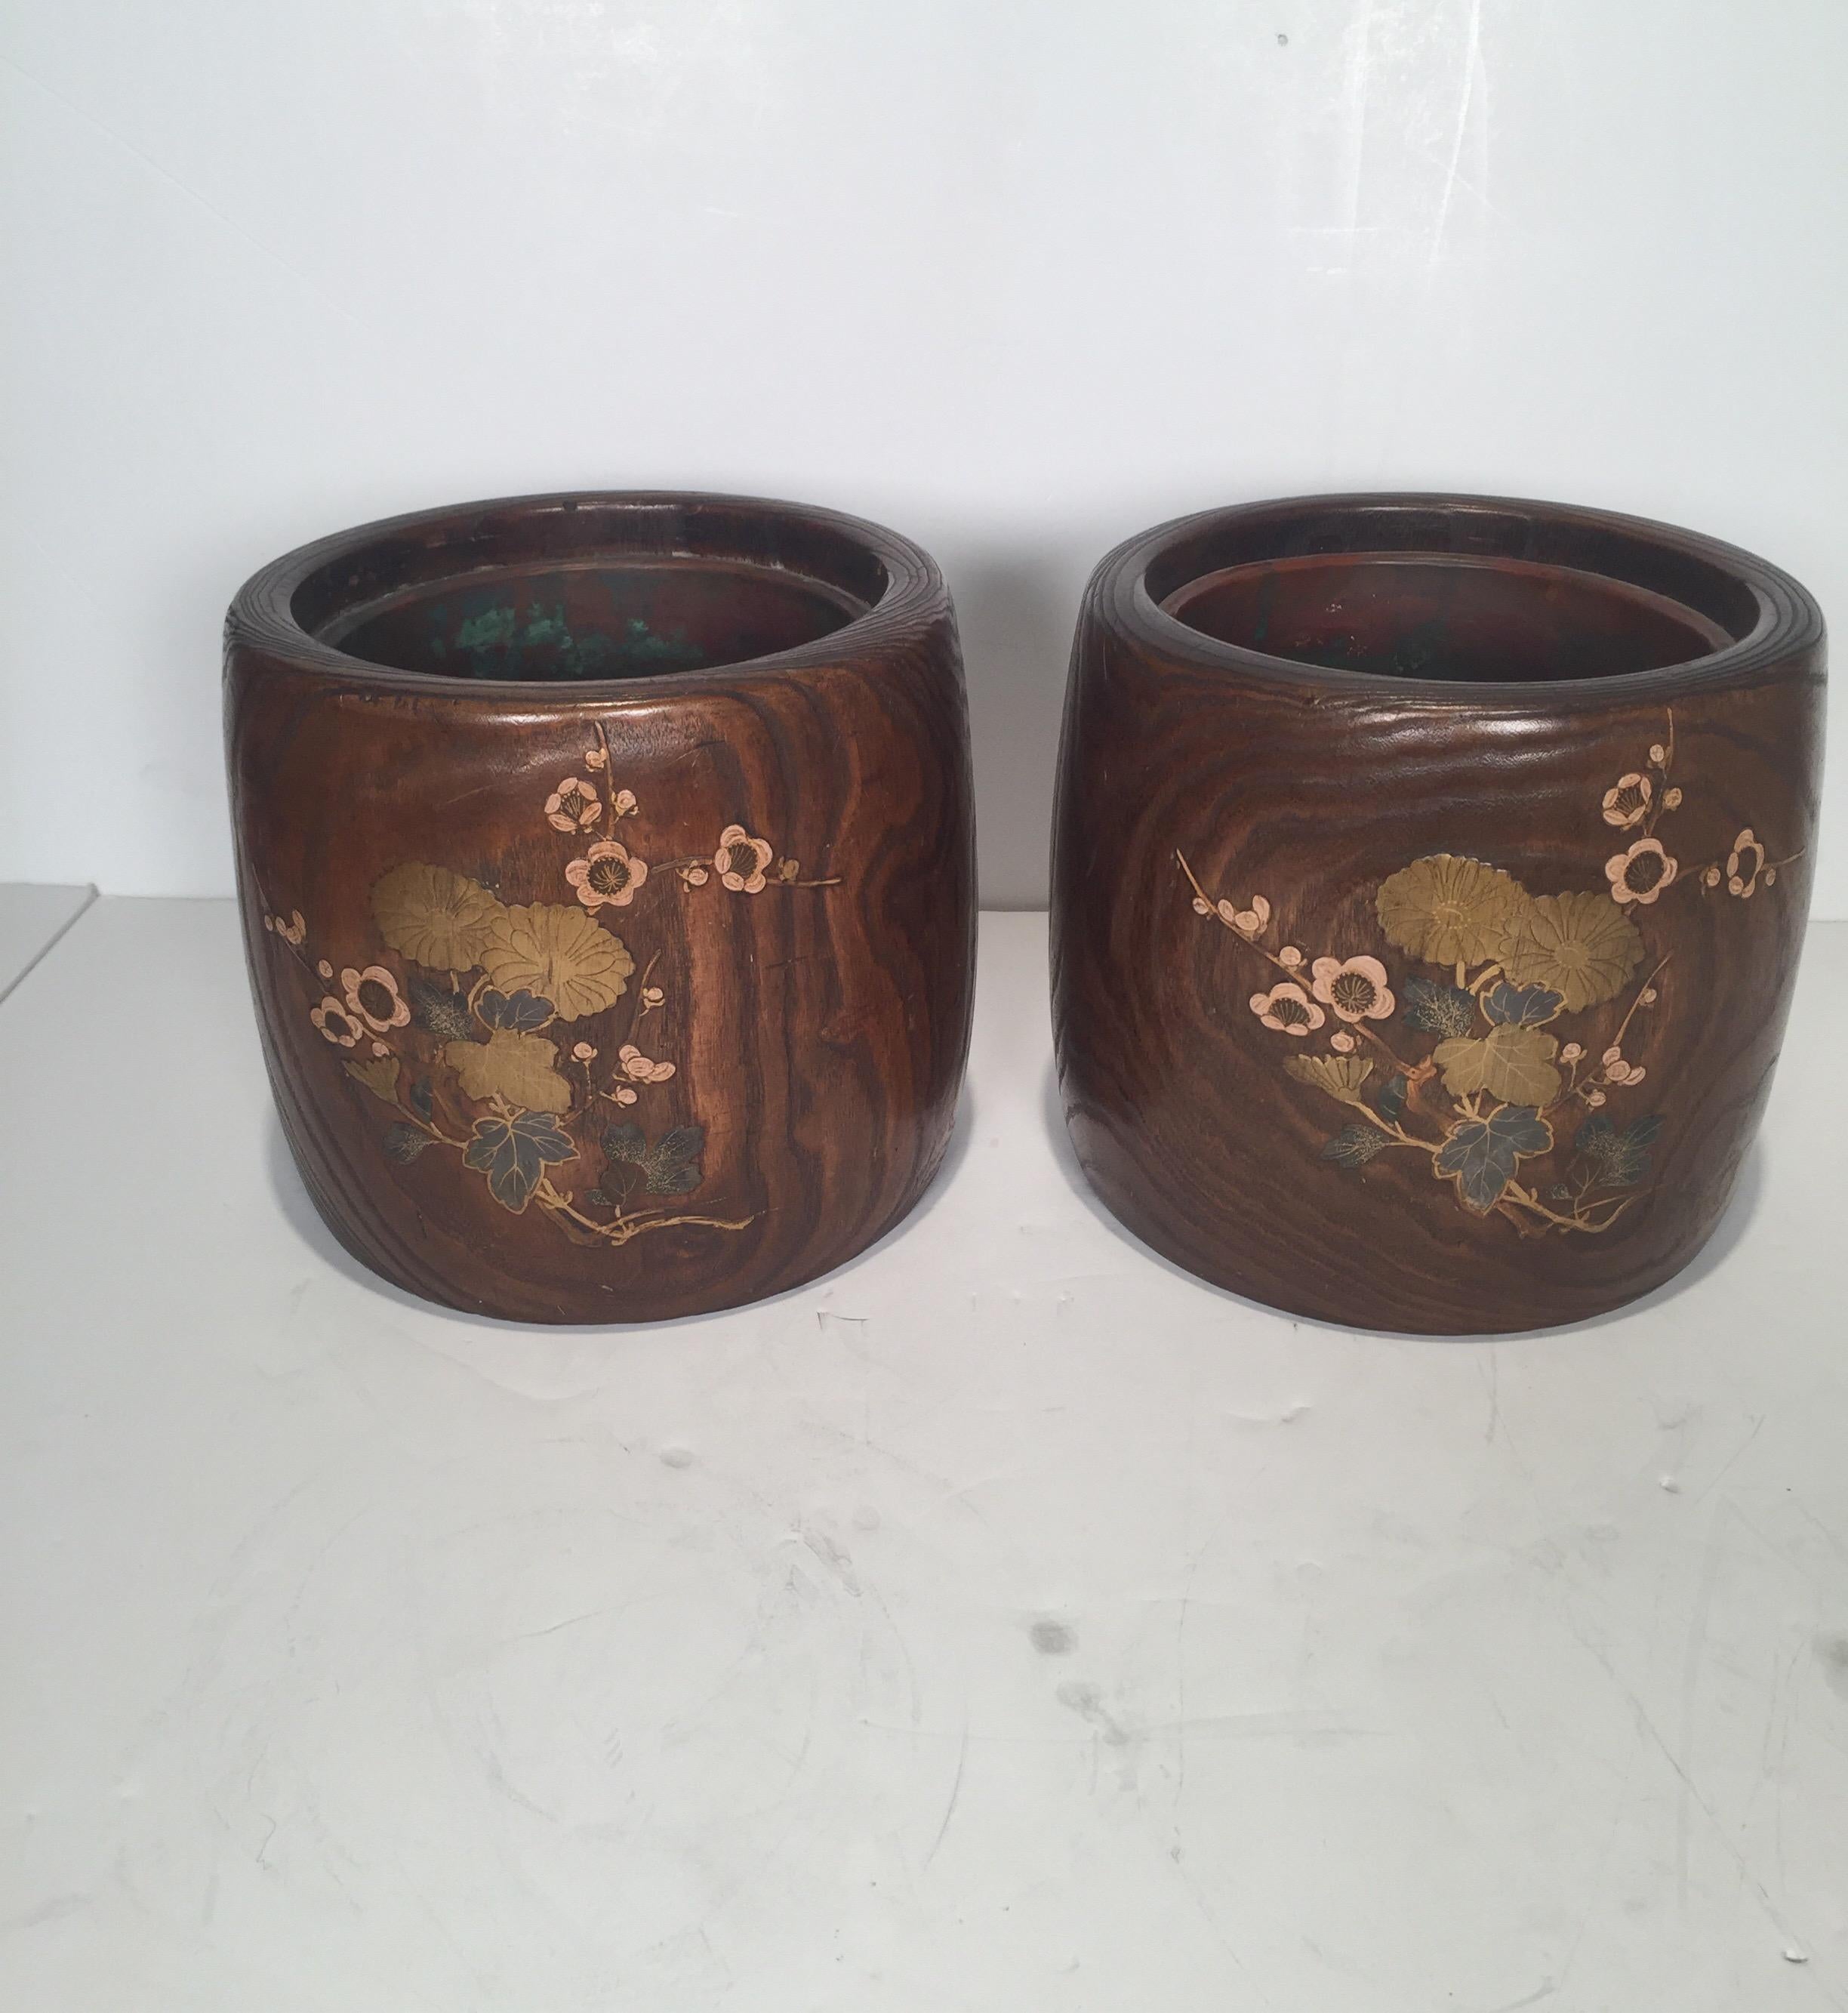 Beautiful pair of wood drum shaped jardinières with lacquer decoration. The interiors with original copper liners.